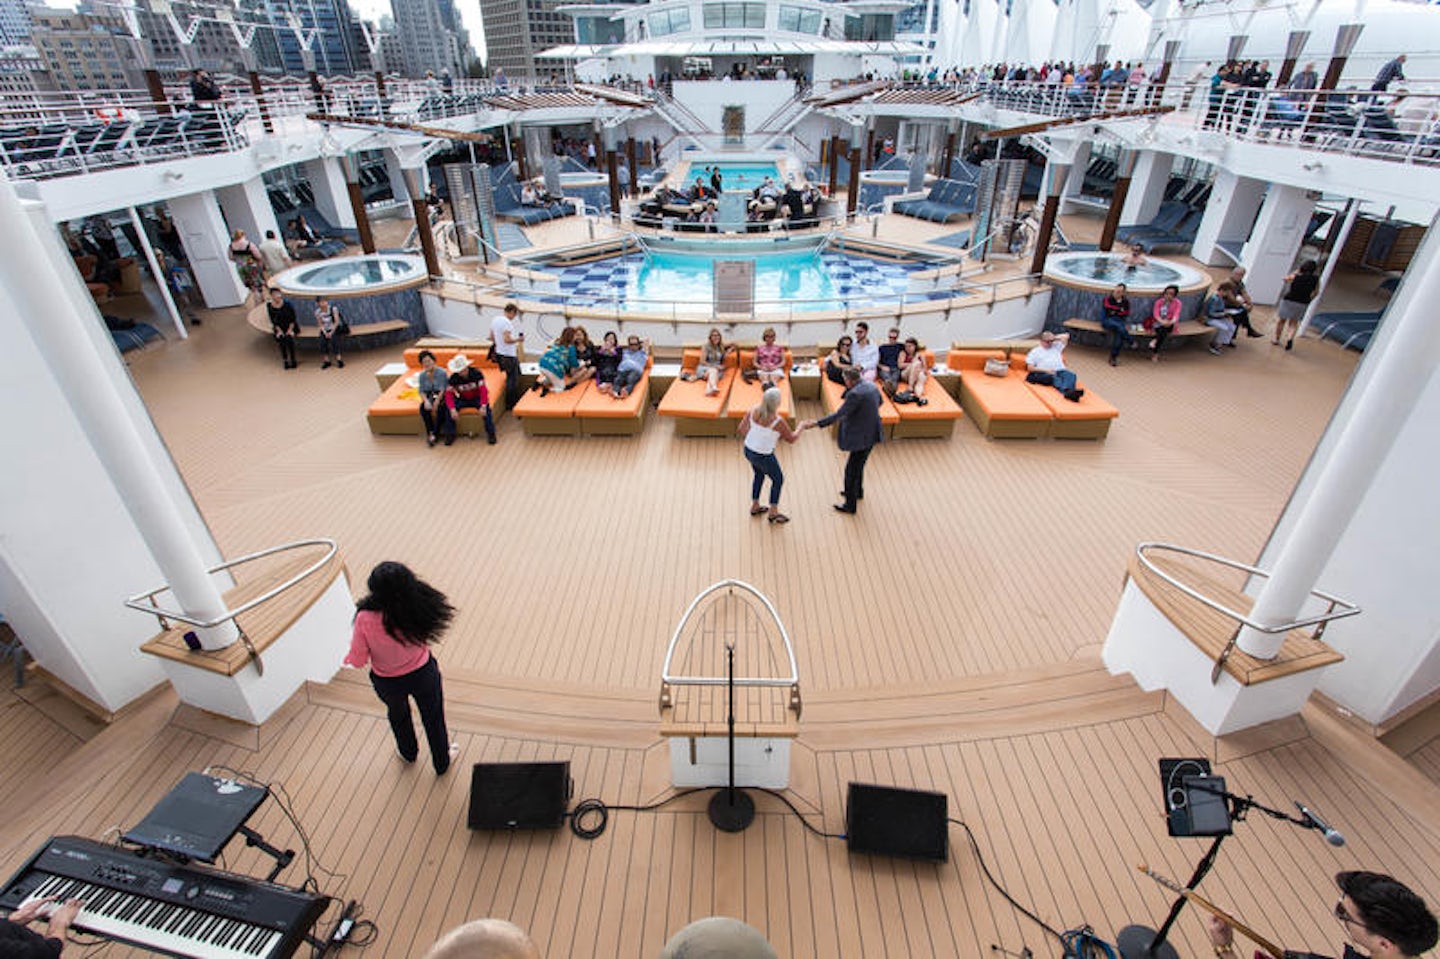 Sailaway Party on Celebrity Infinity